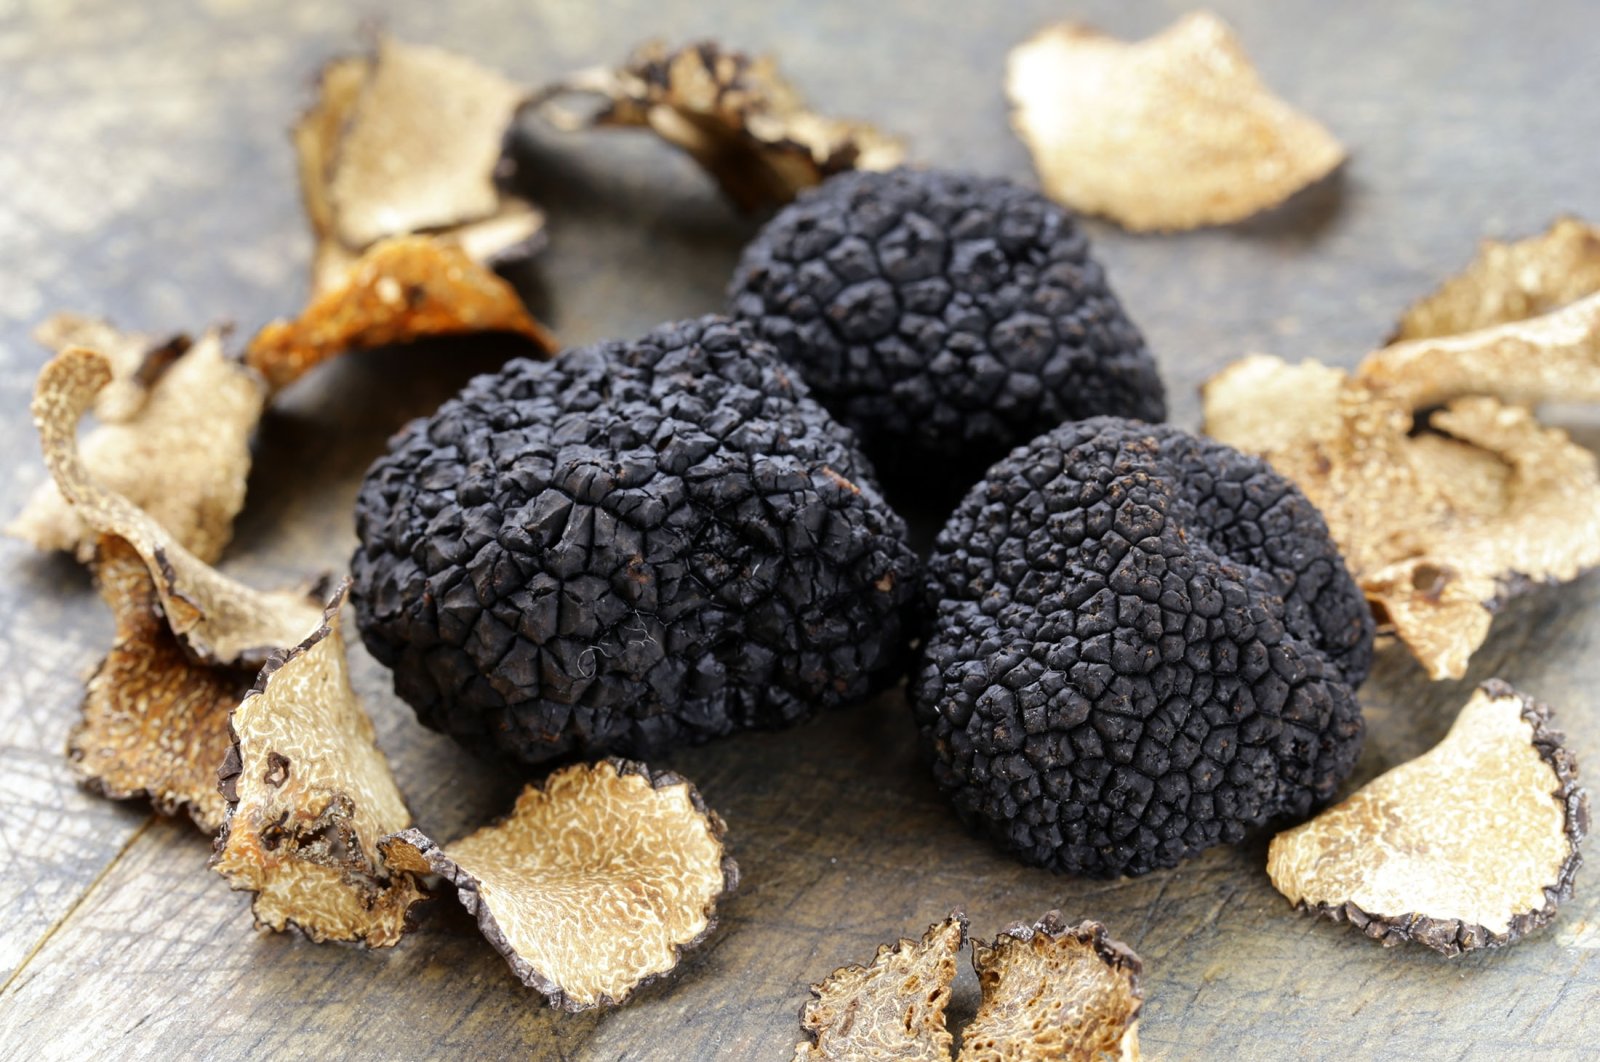 Black truffles are one of the most expensive edible mushrooms in the world. (Shutterstock Photo)